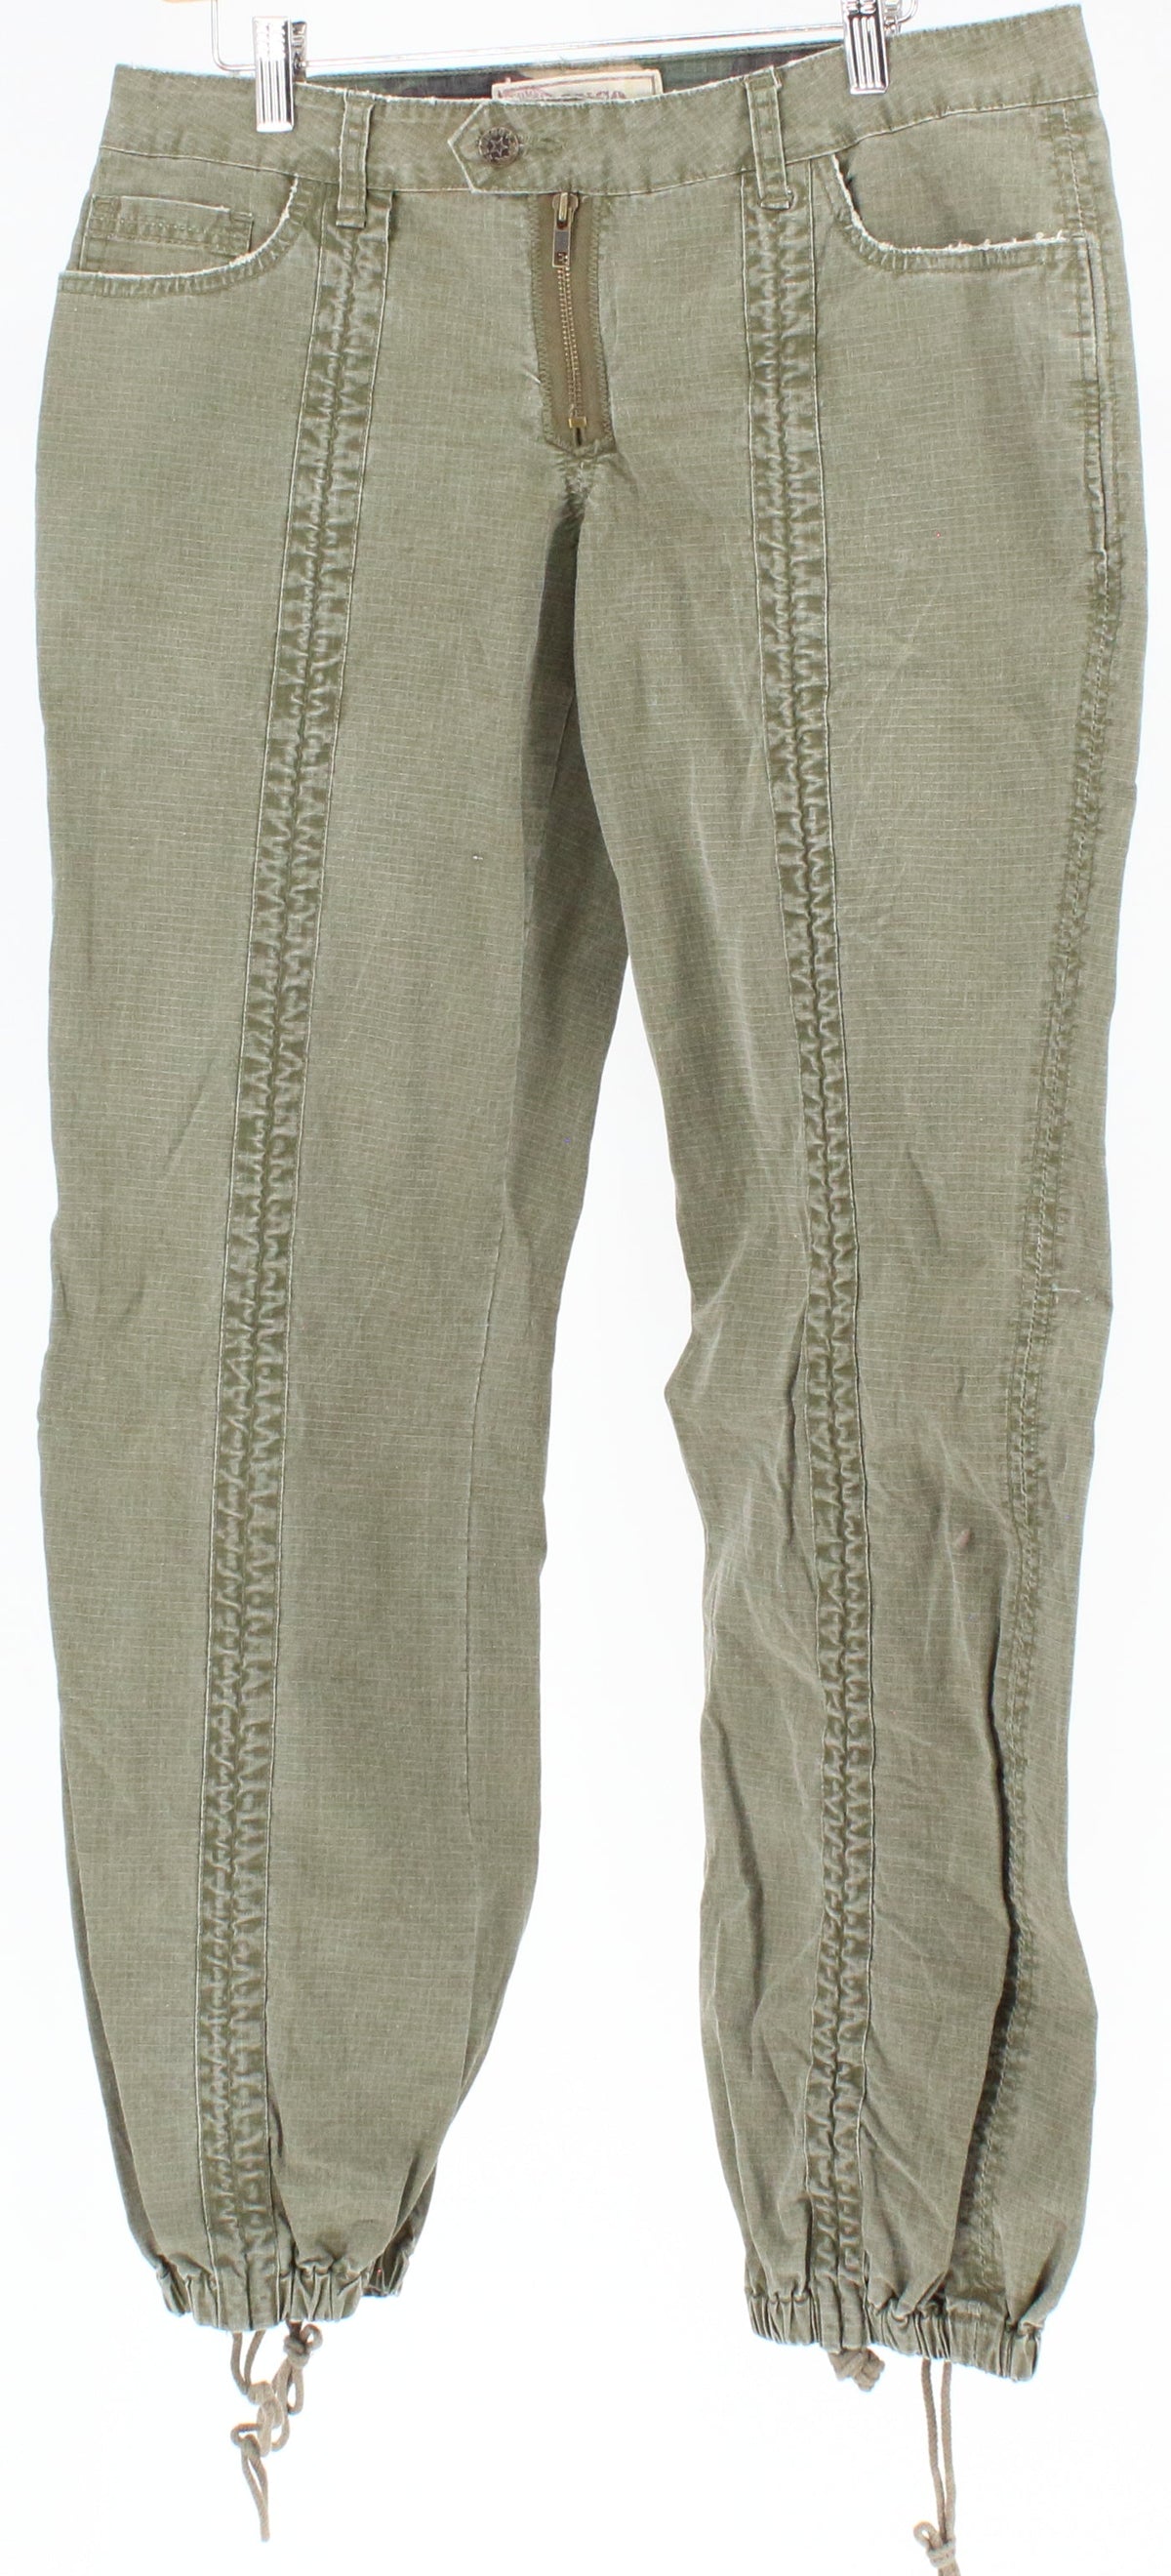 Bongo Army Green Jogger Pants with Lace and Elasic Hem